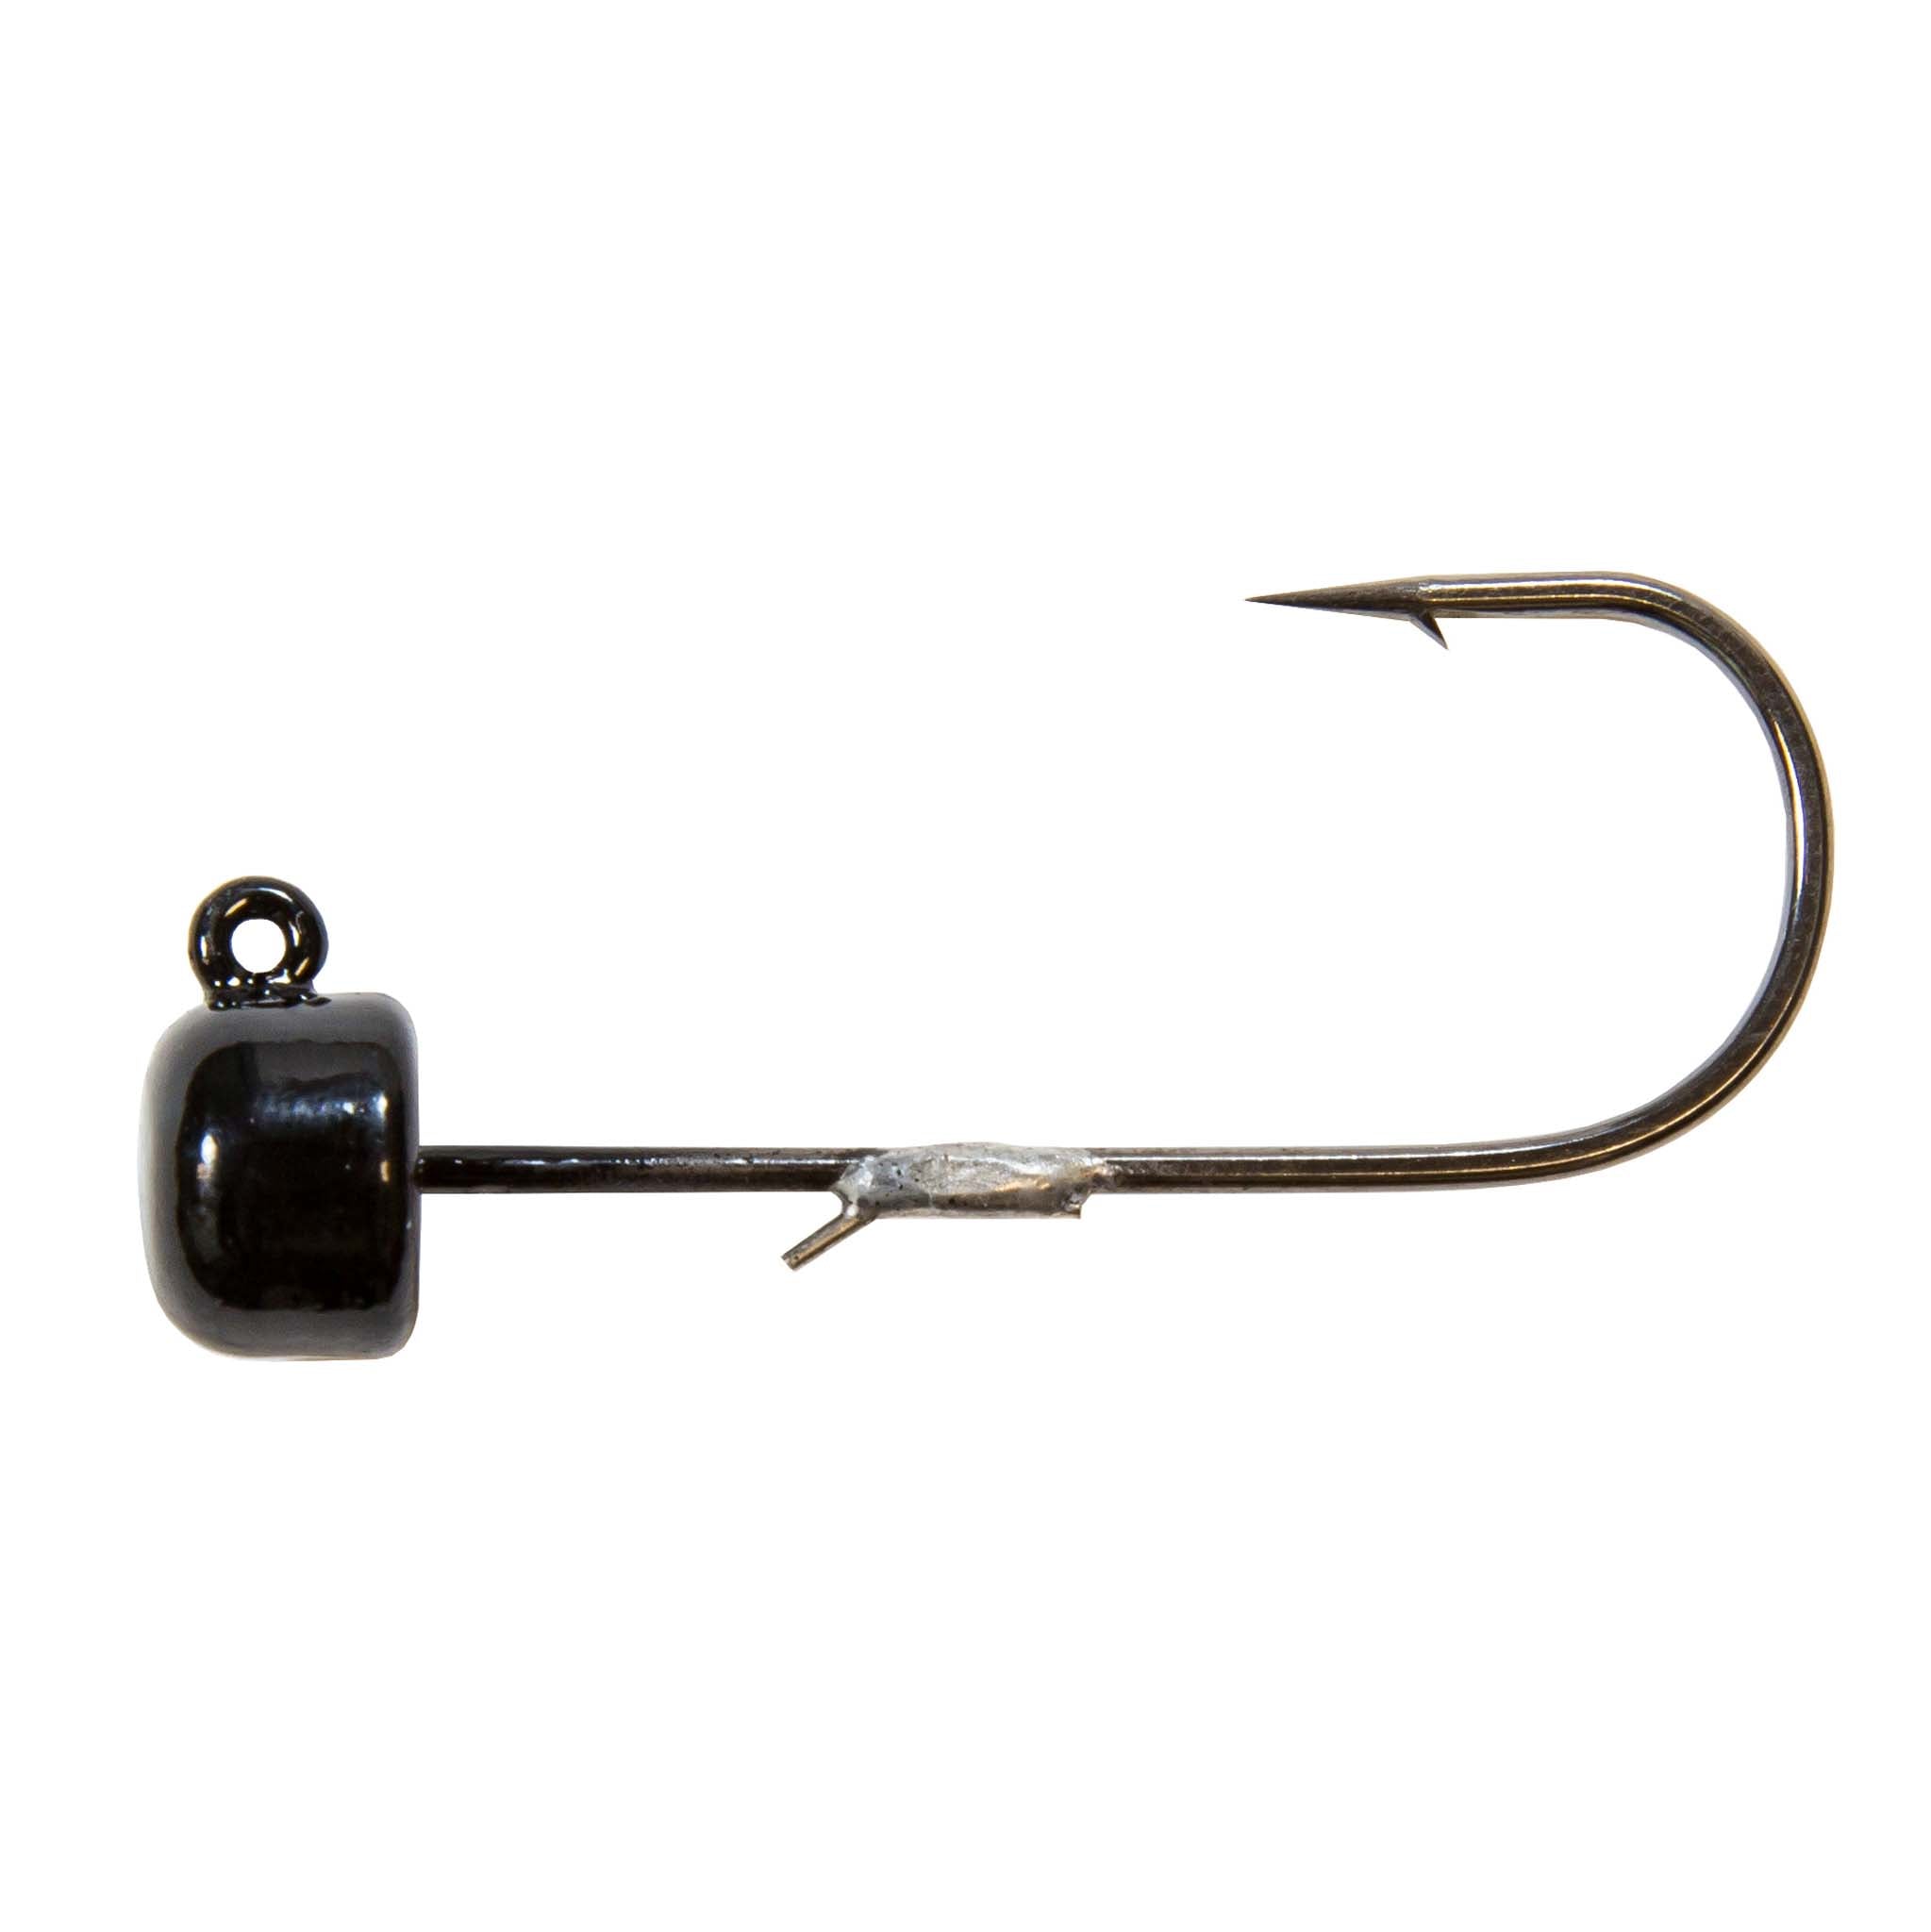 Z-Man Weedless Power Finesse ShroomZ Jighead Review - Wired2Fish